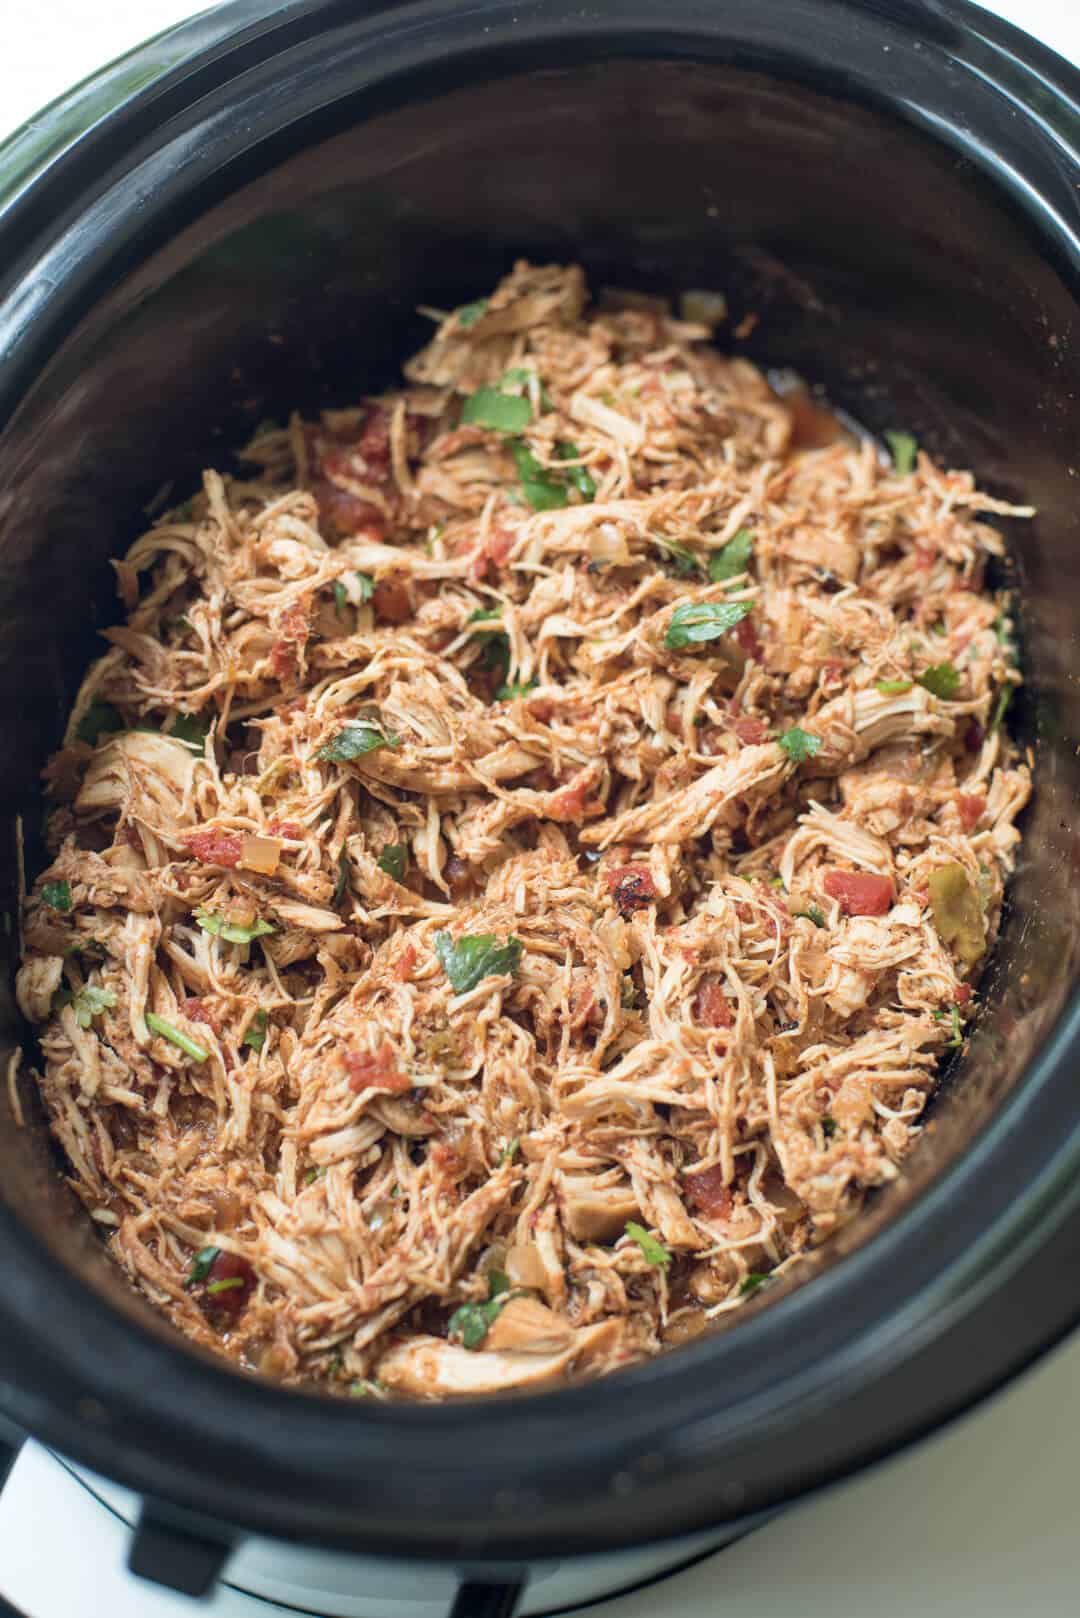 Crock Pot shredded chicken for tacos from over the top in a slow cooker.